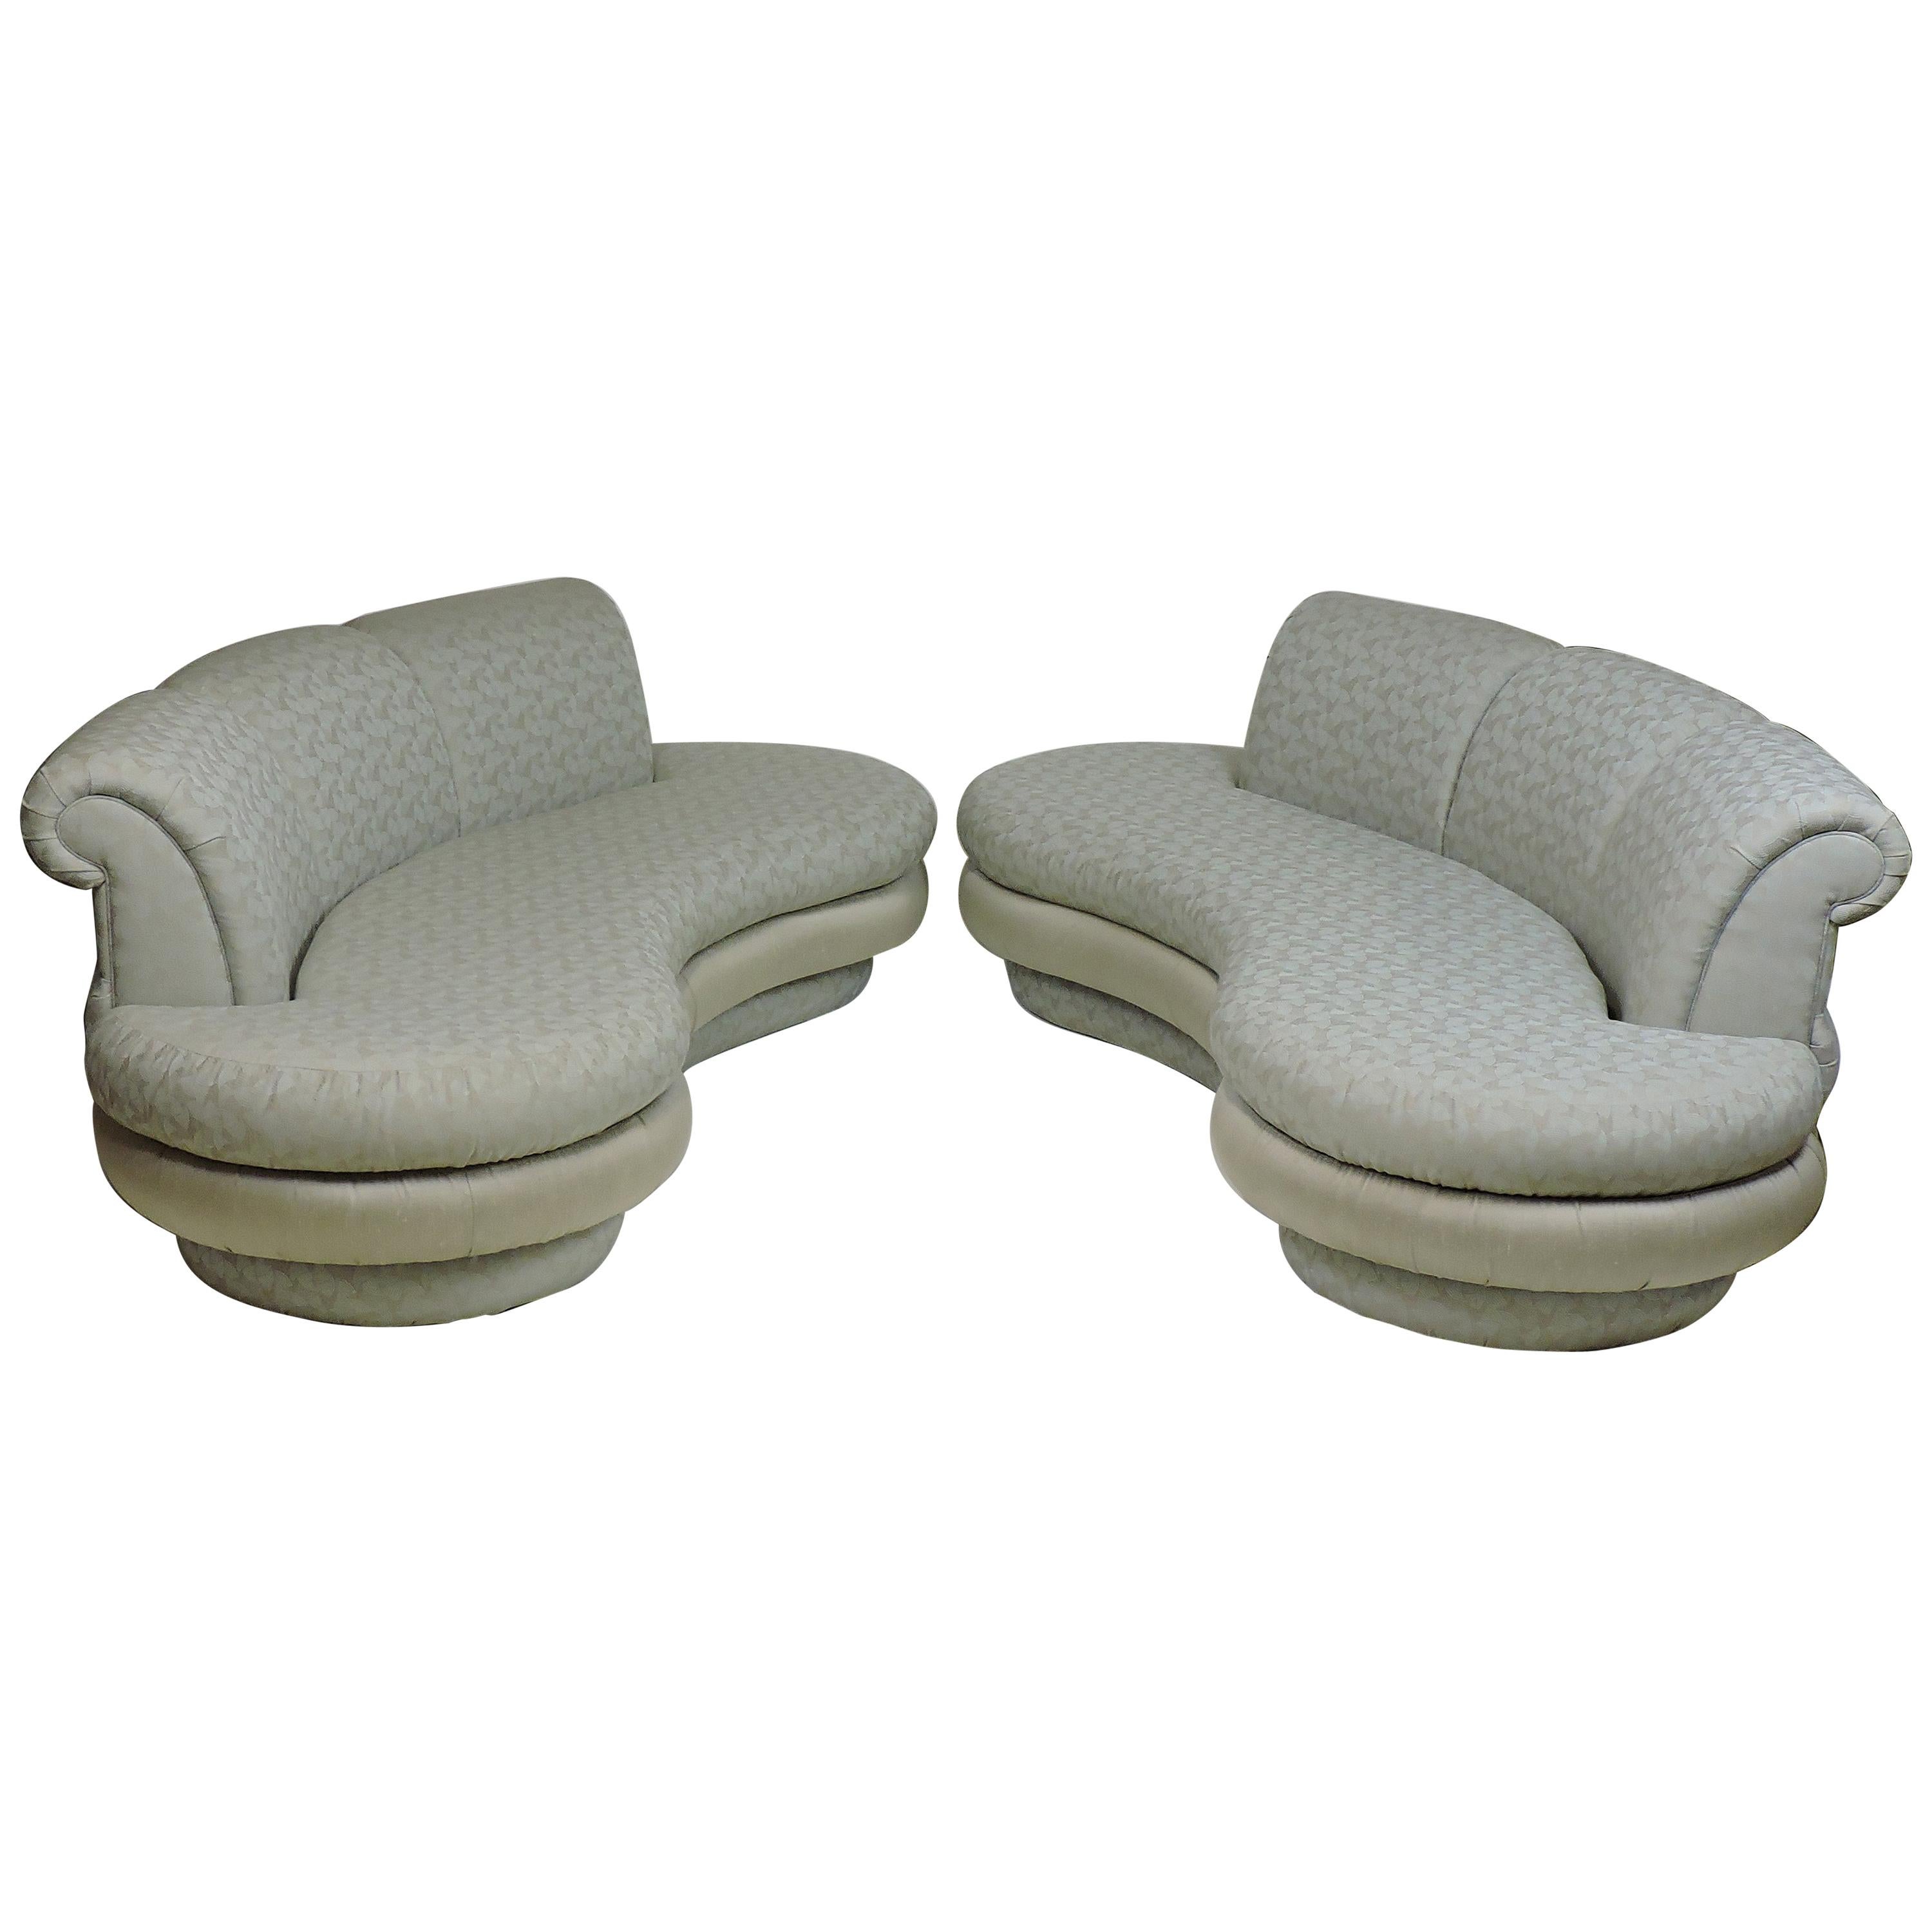 Pair of Adrian Pearsall Mid-Century Modern Cloud Kidney Shaped Sofas